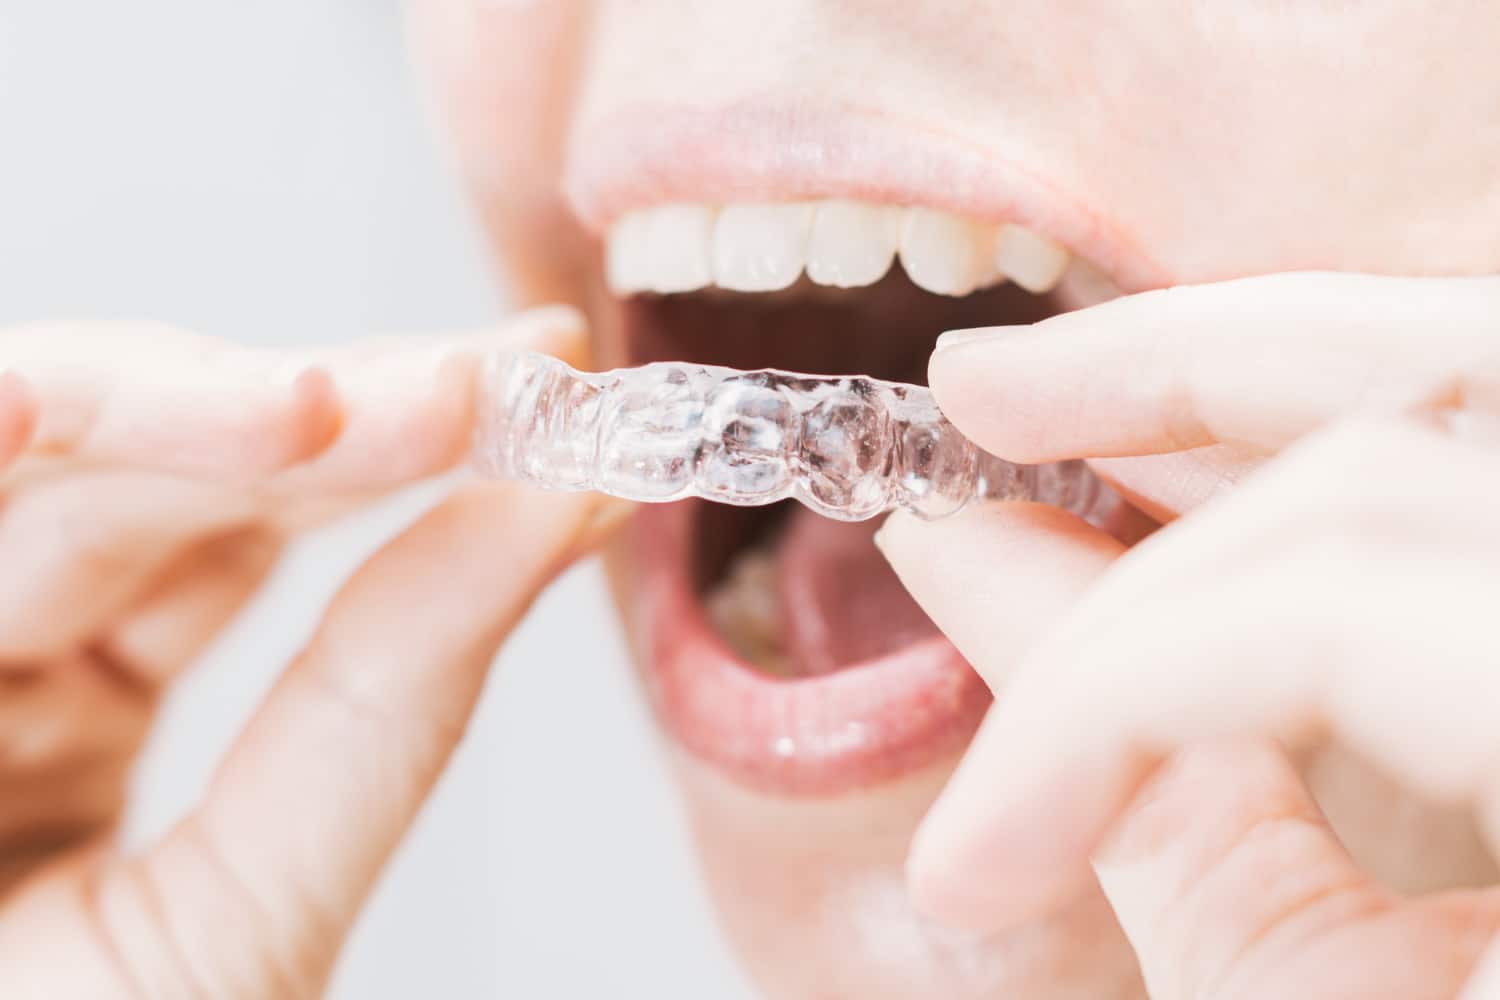 5 Signs You Need Braces, Invisalign, or Another Orthodontic Procedure